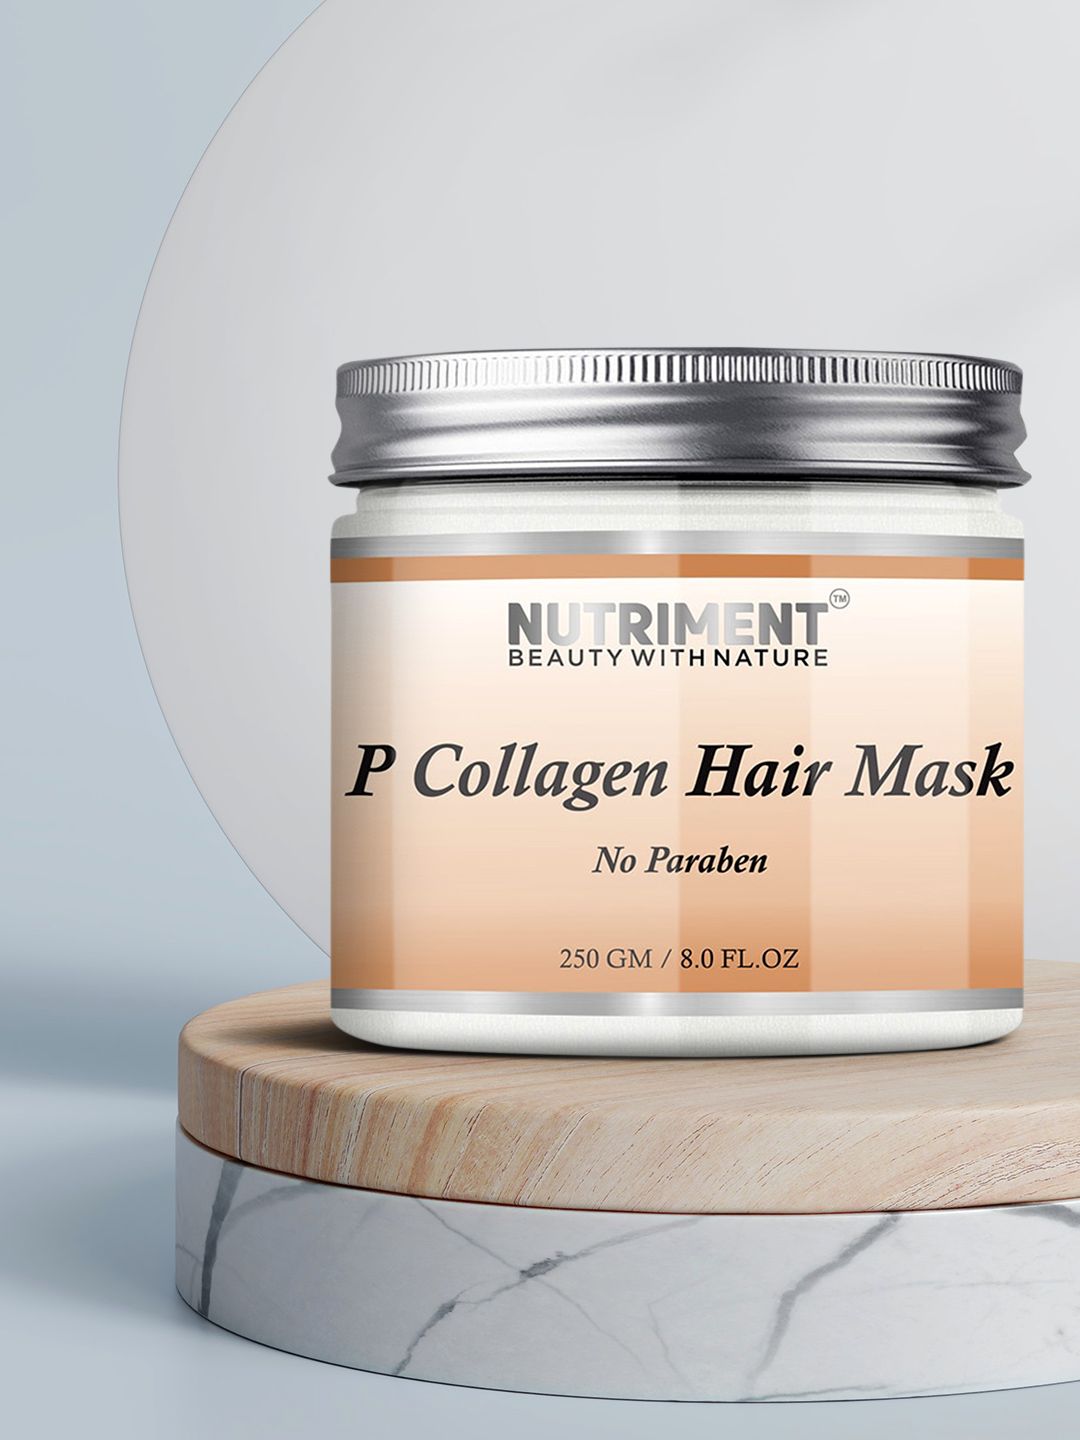 Nutriment P Collagen Hair Mask 250 gm Price in India